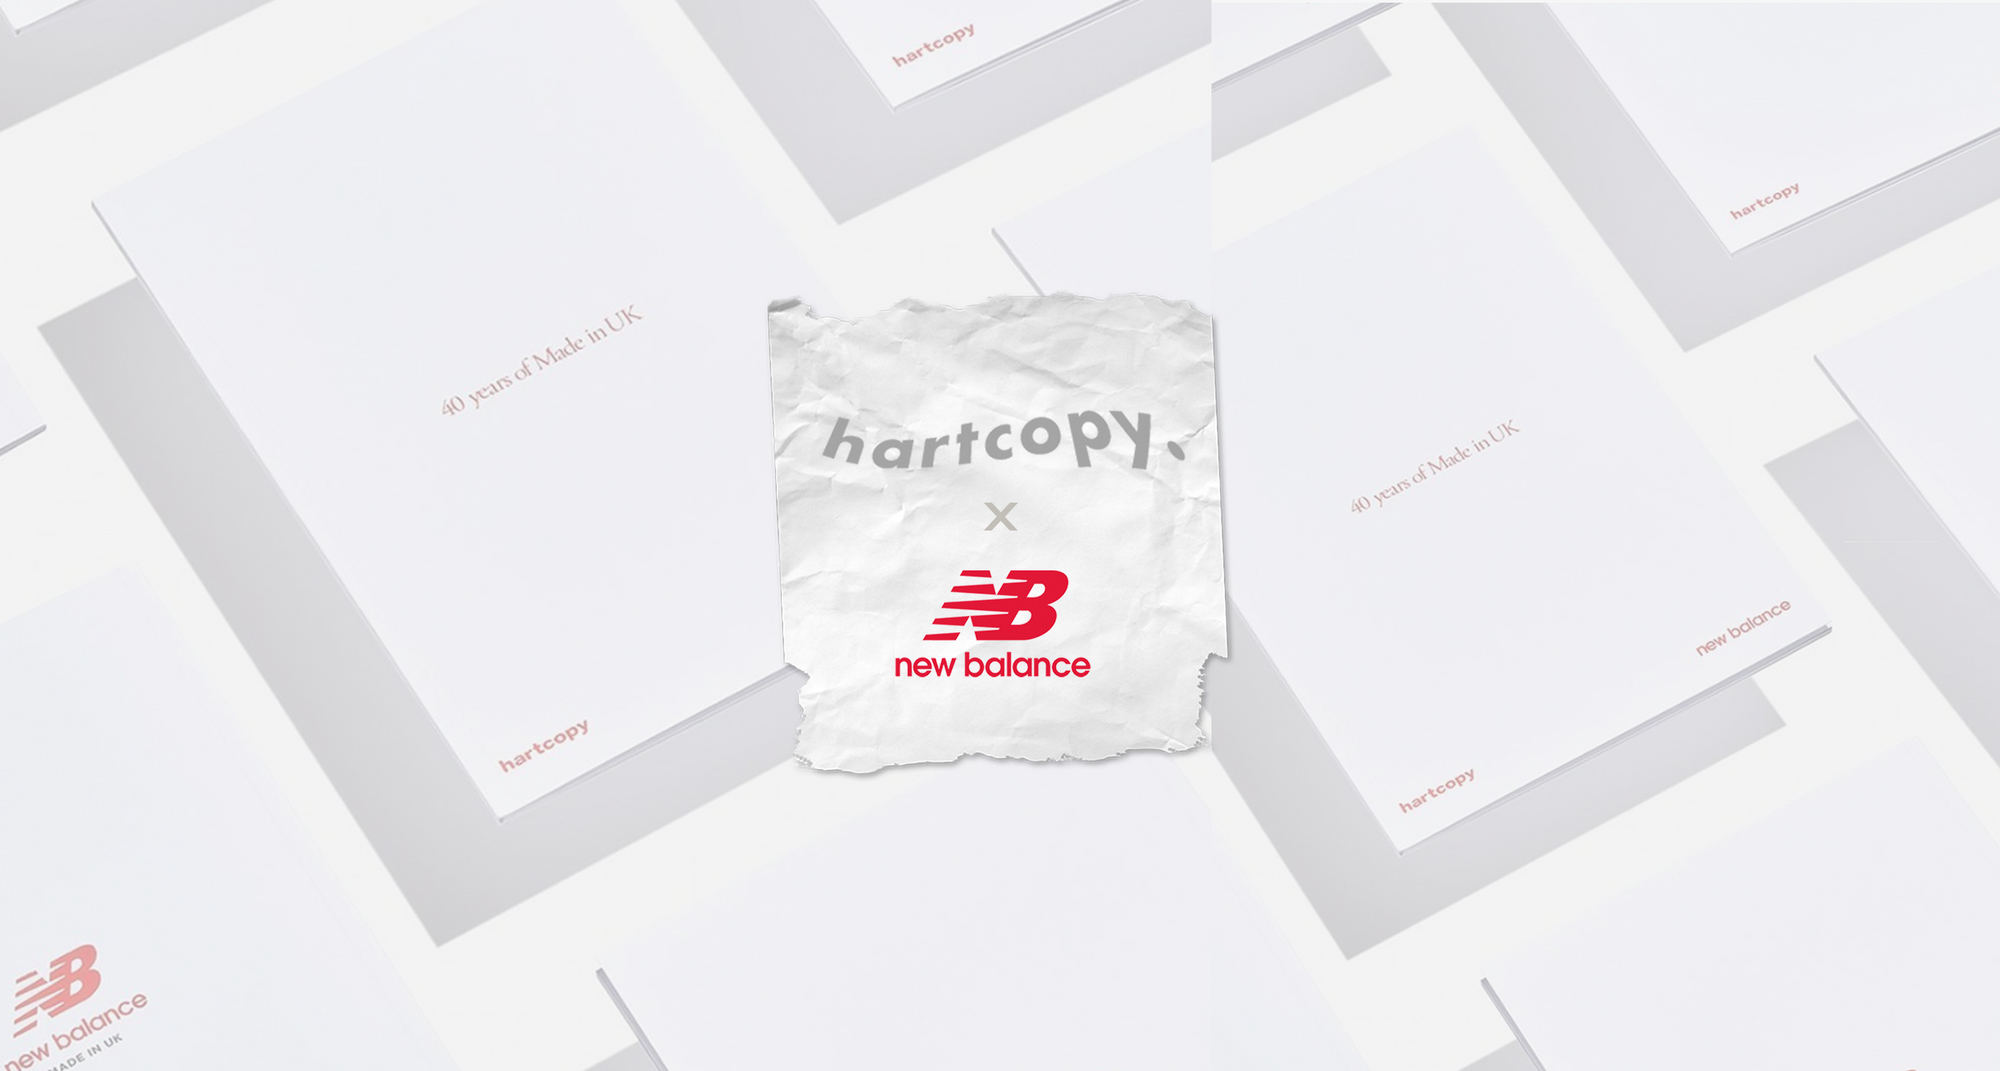 Hartcopy collaborate with New Balance to celebrate 40 years of MiUK